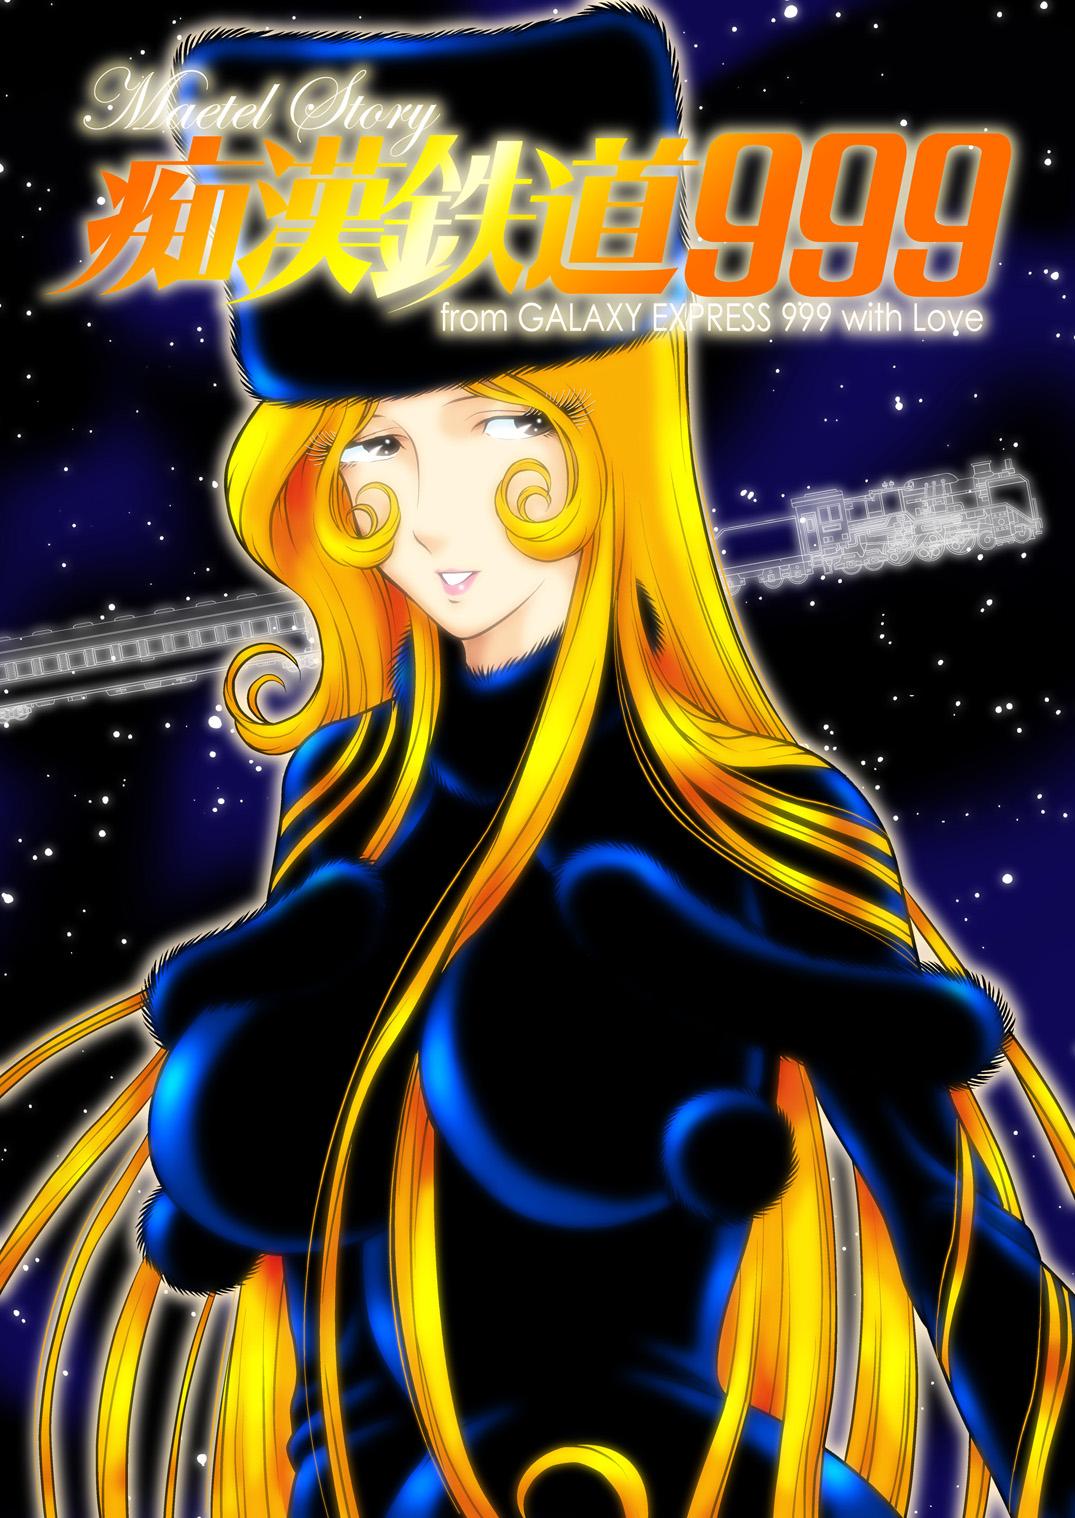 Oldyoung Chikan Tetsudou 999 - Galaxy express 999 Big Penis - Picture 1